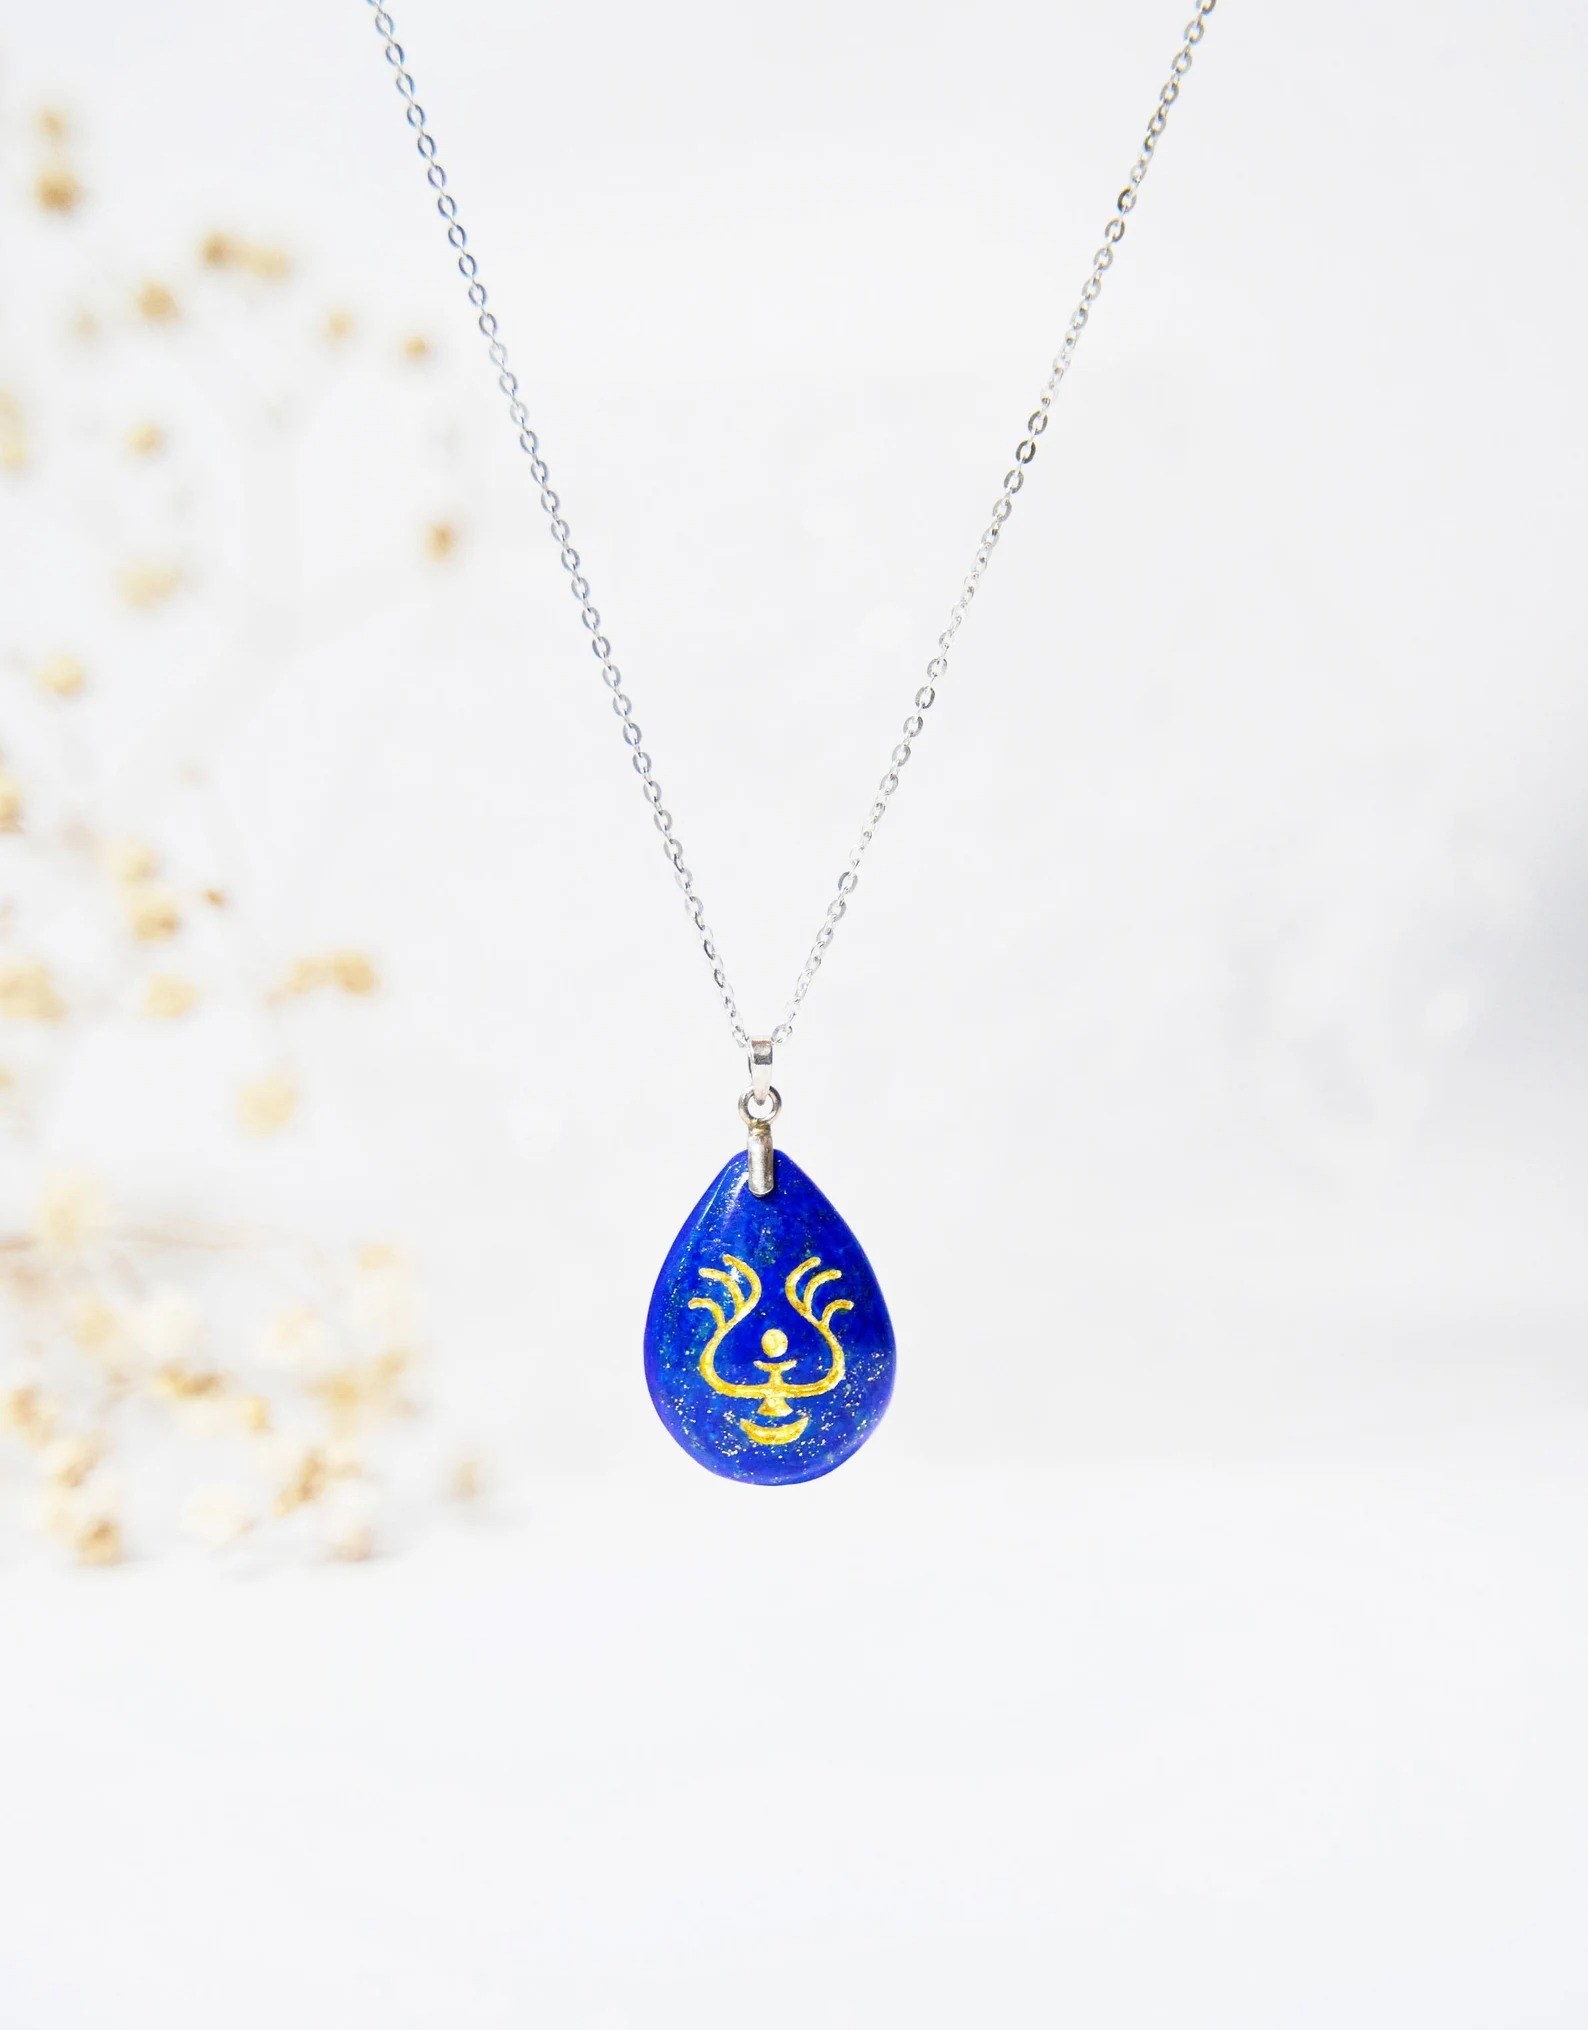 teardrop shaped lapis lazuli pendant with silver chain and symbol like the one in the movie &quot;Castle in the Sky&quot;